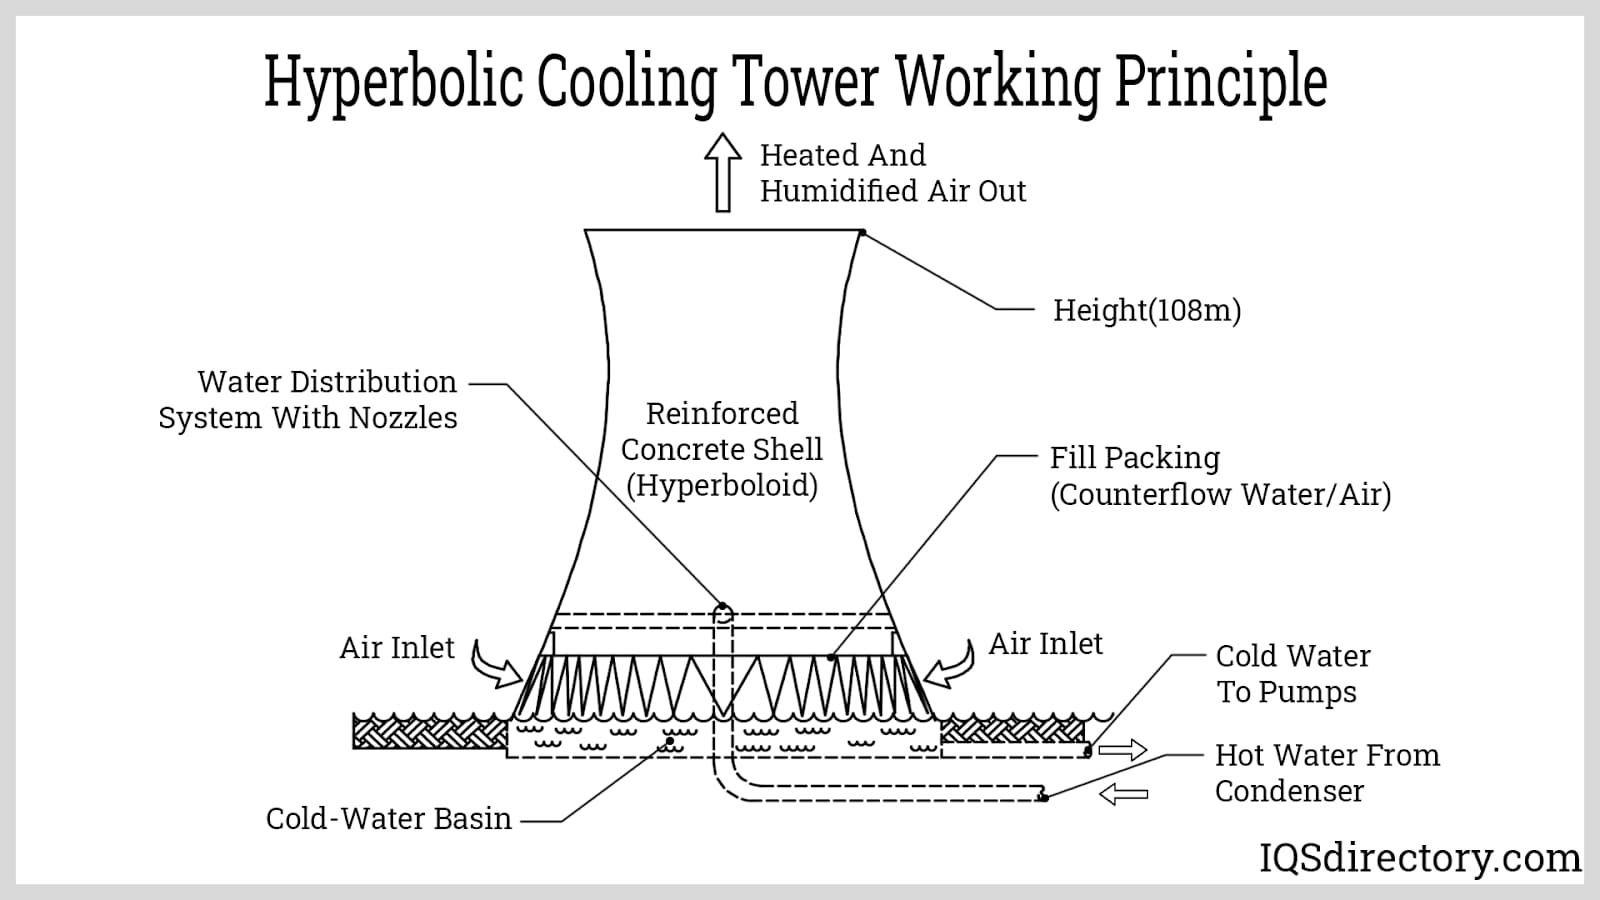 Hyperbolic Cooling Tower Working Principle